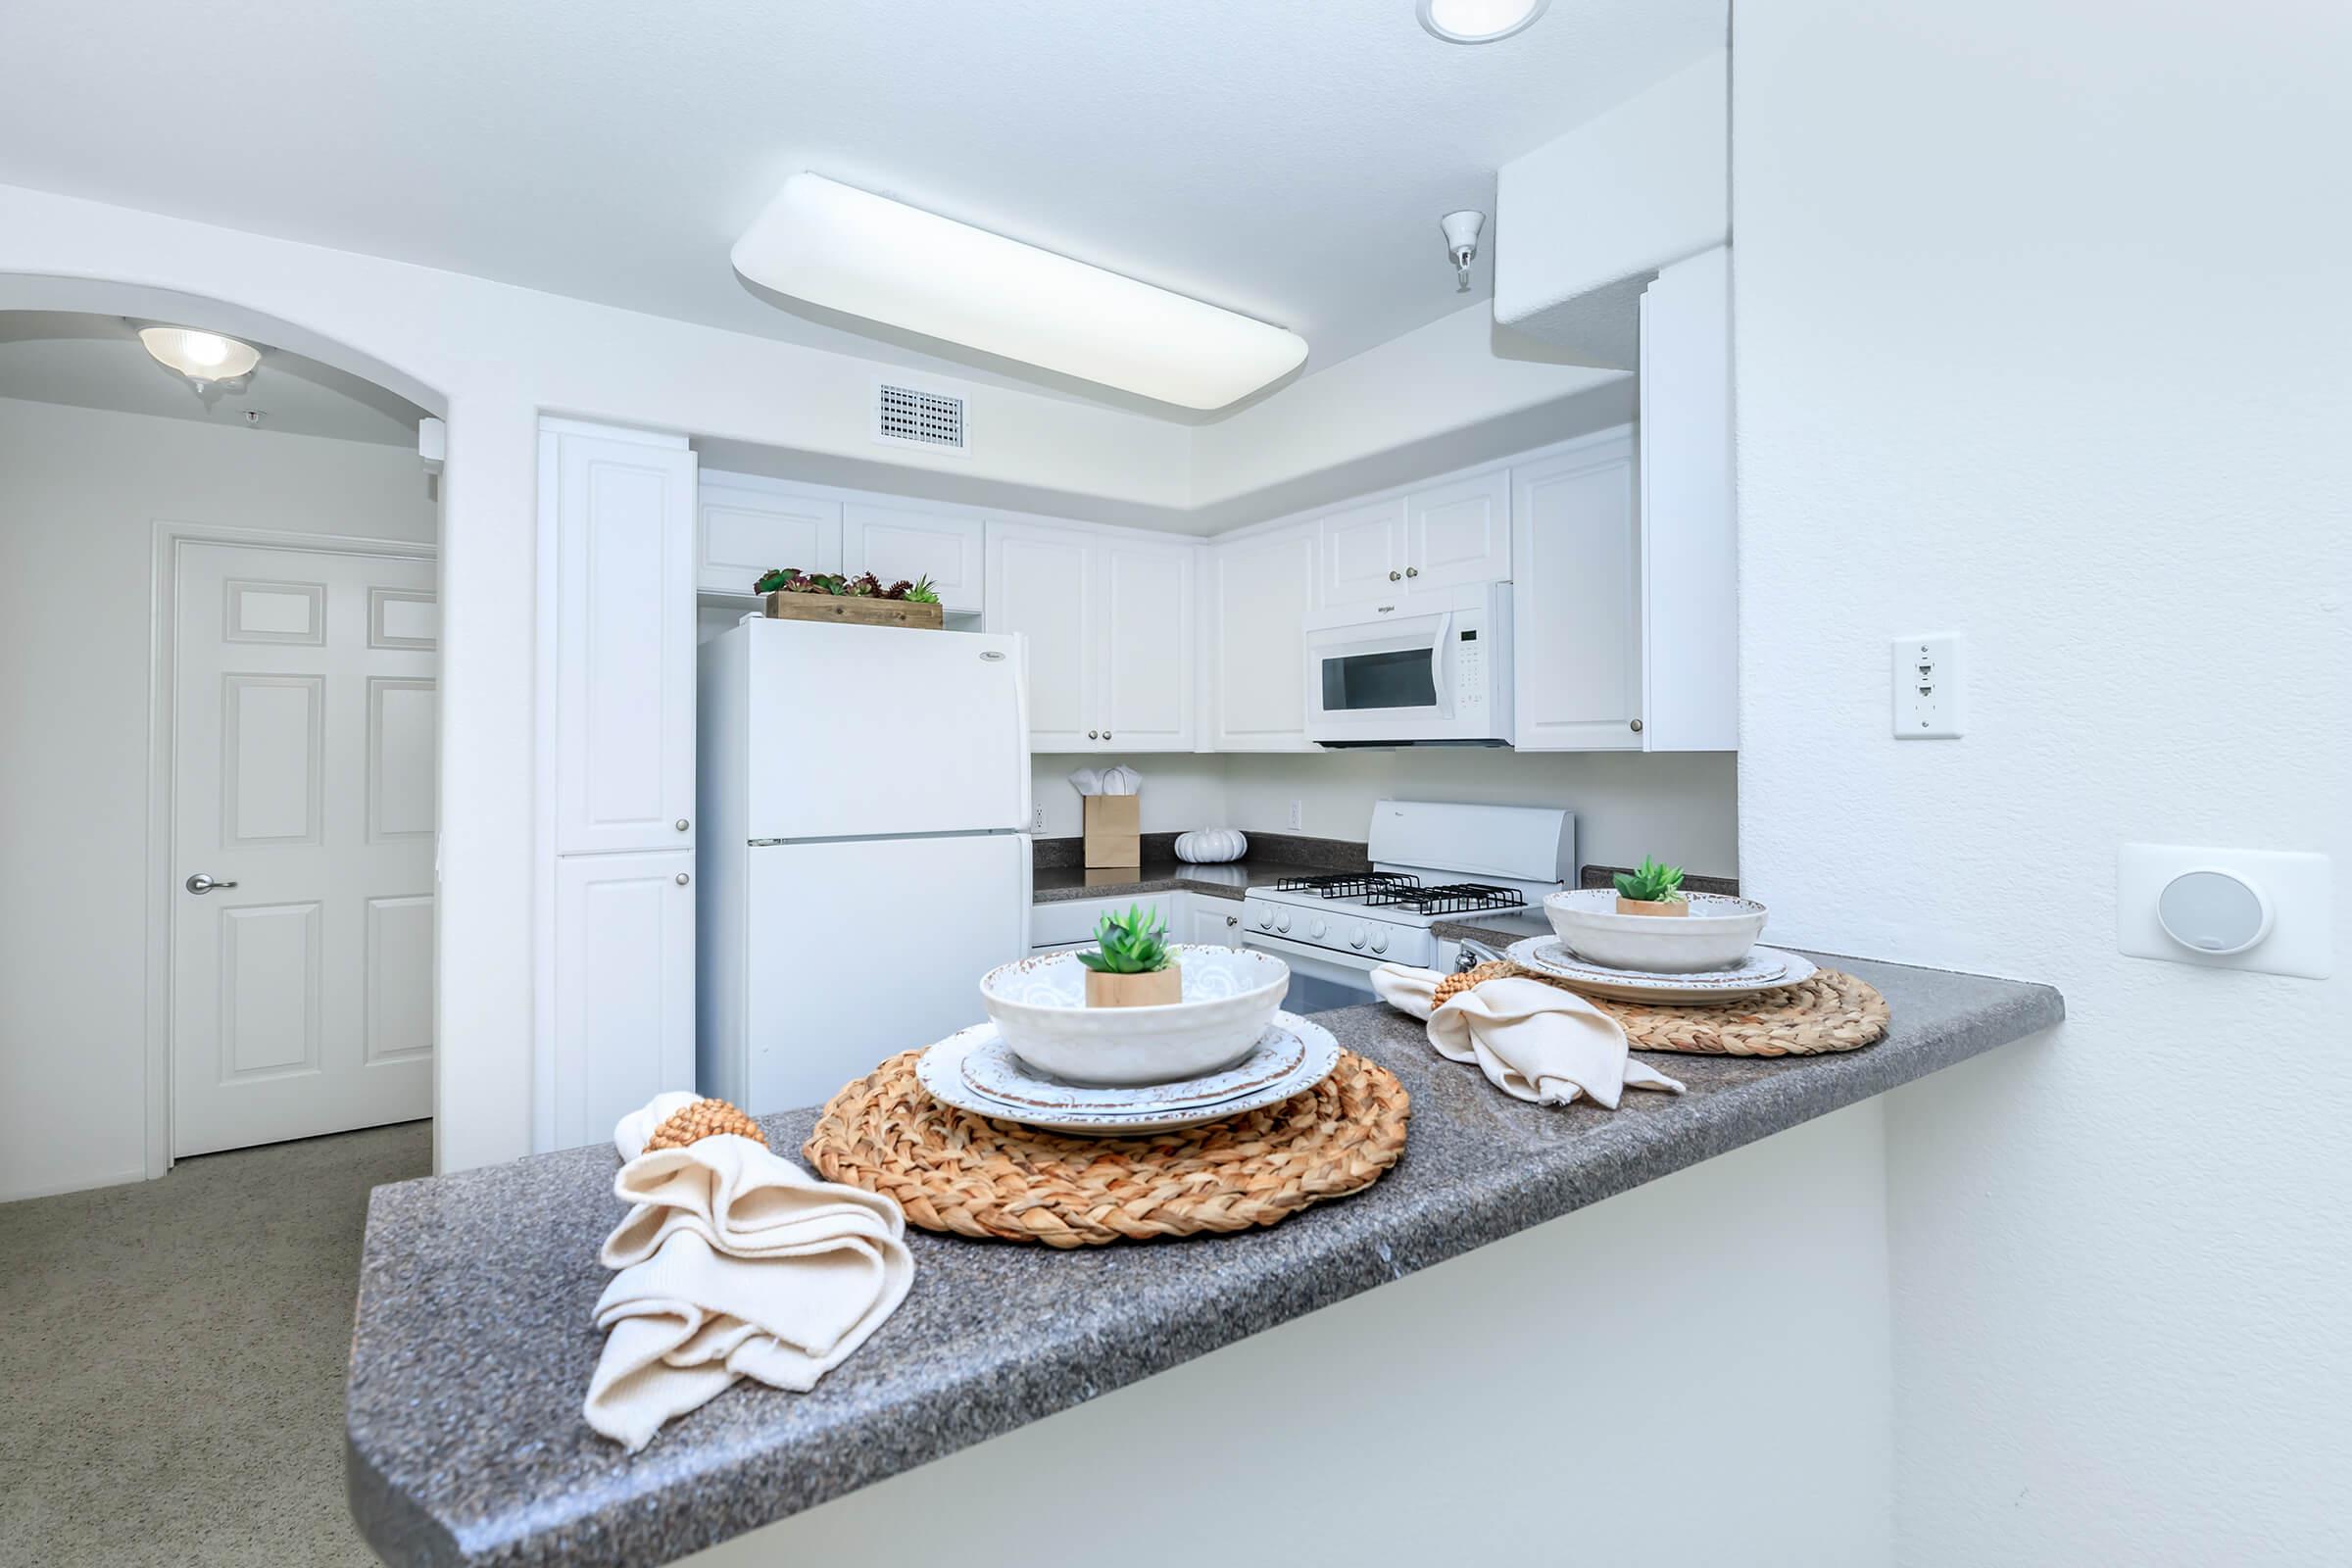 Kitchen counter with white bowls